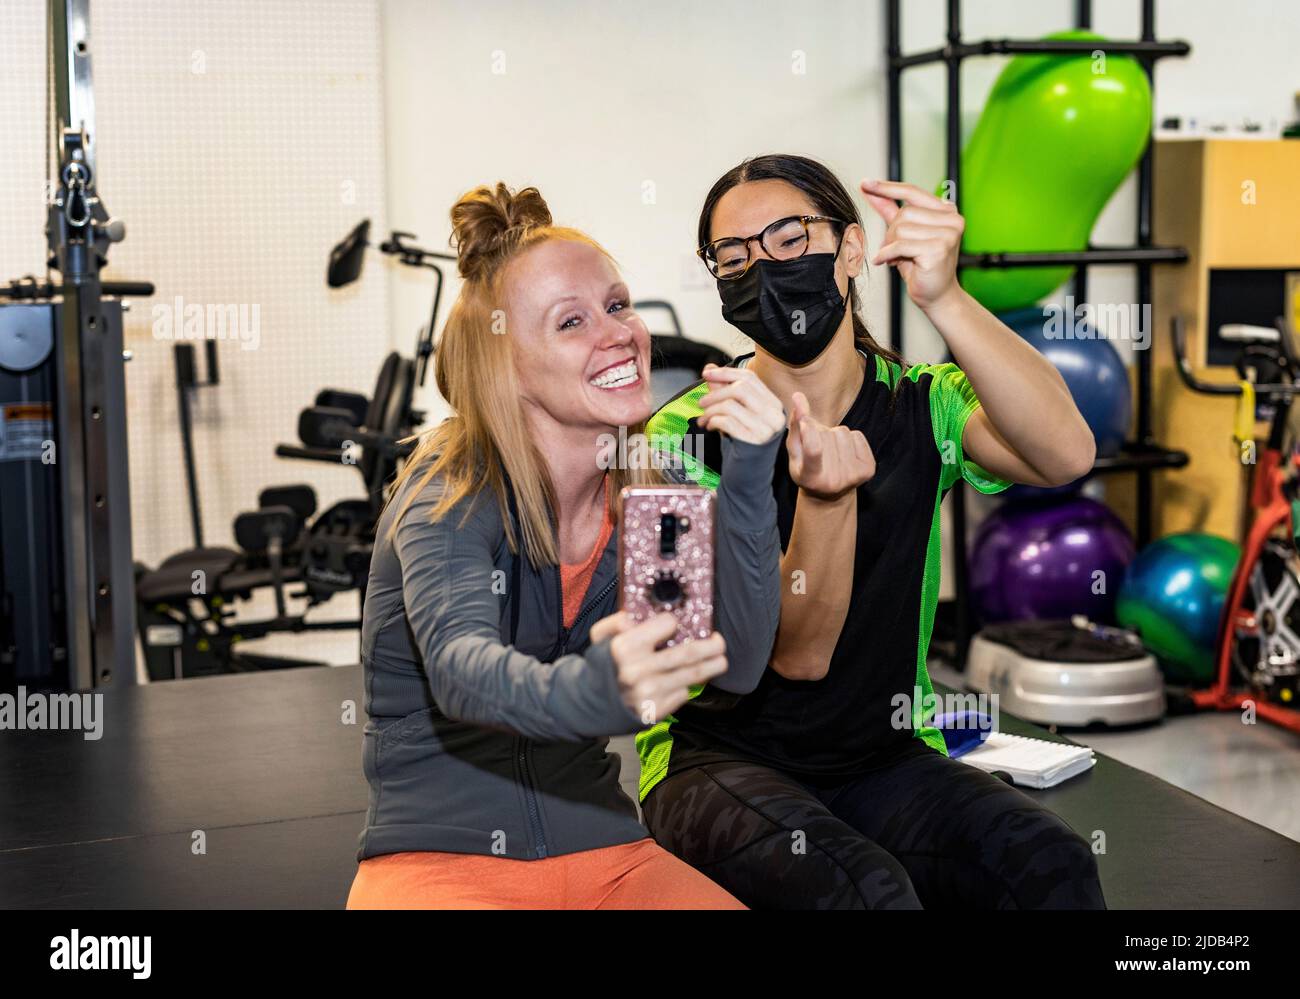 A paraplegic woman and trainer celebrating the day's accomplishment by posting on social media while clicking their fingers: Edmonton, Alberta, Canada Stock Photo